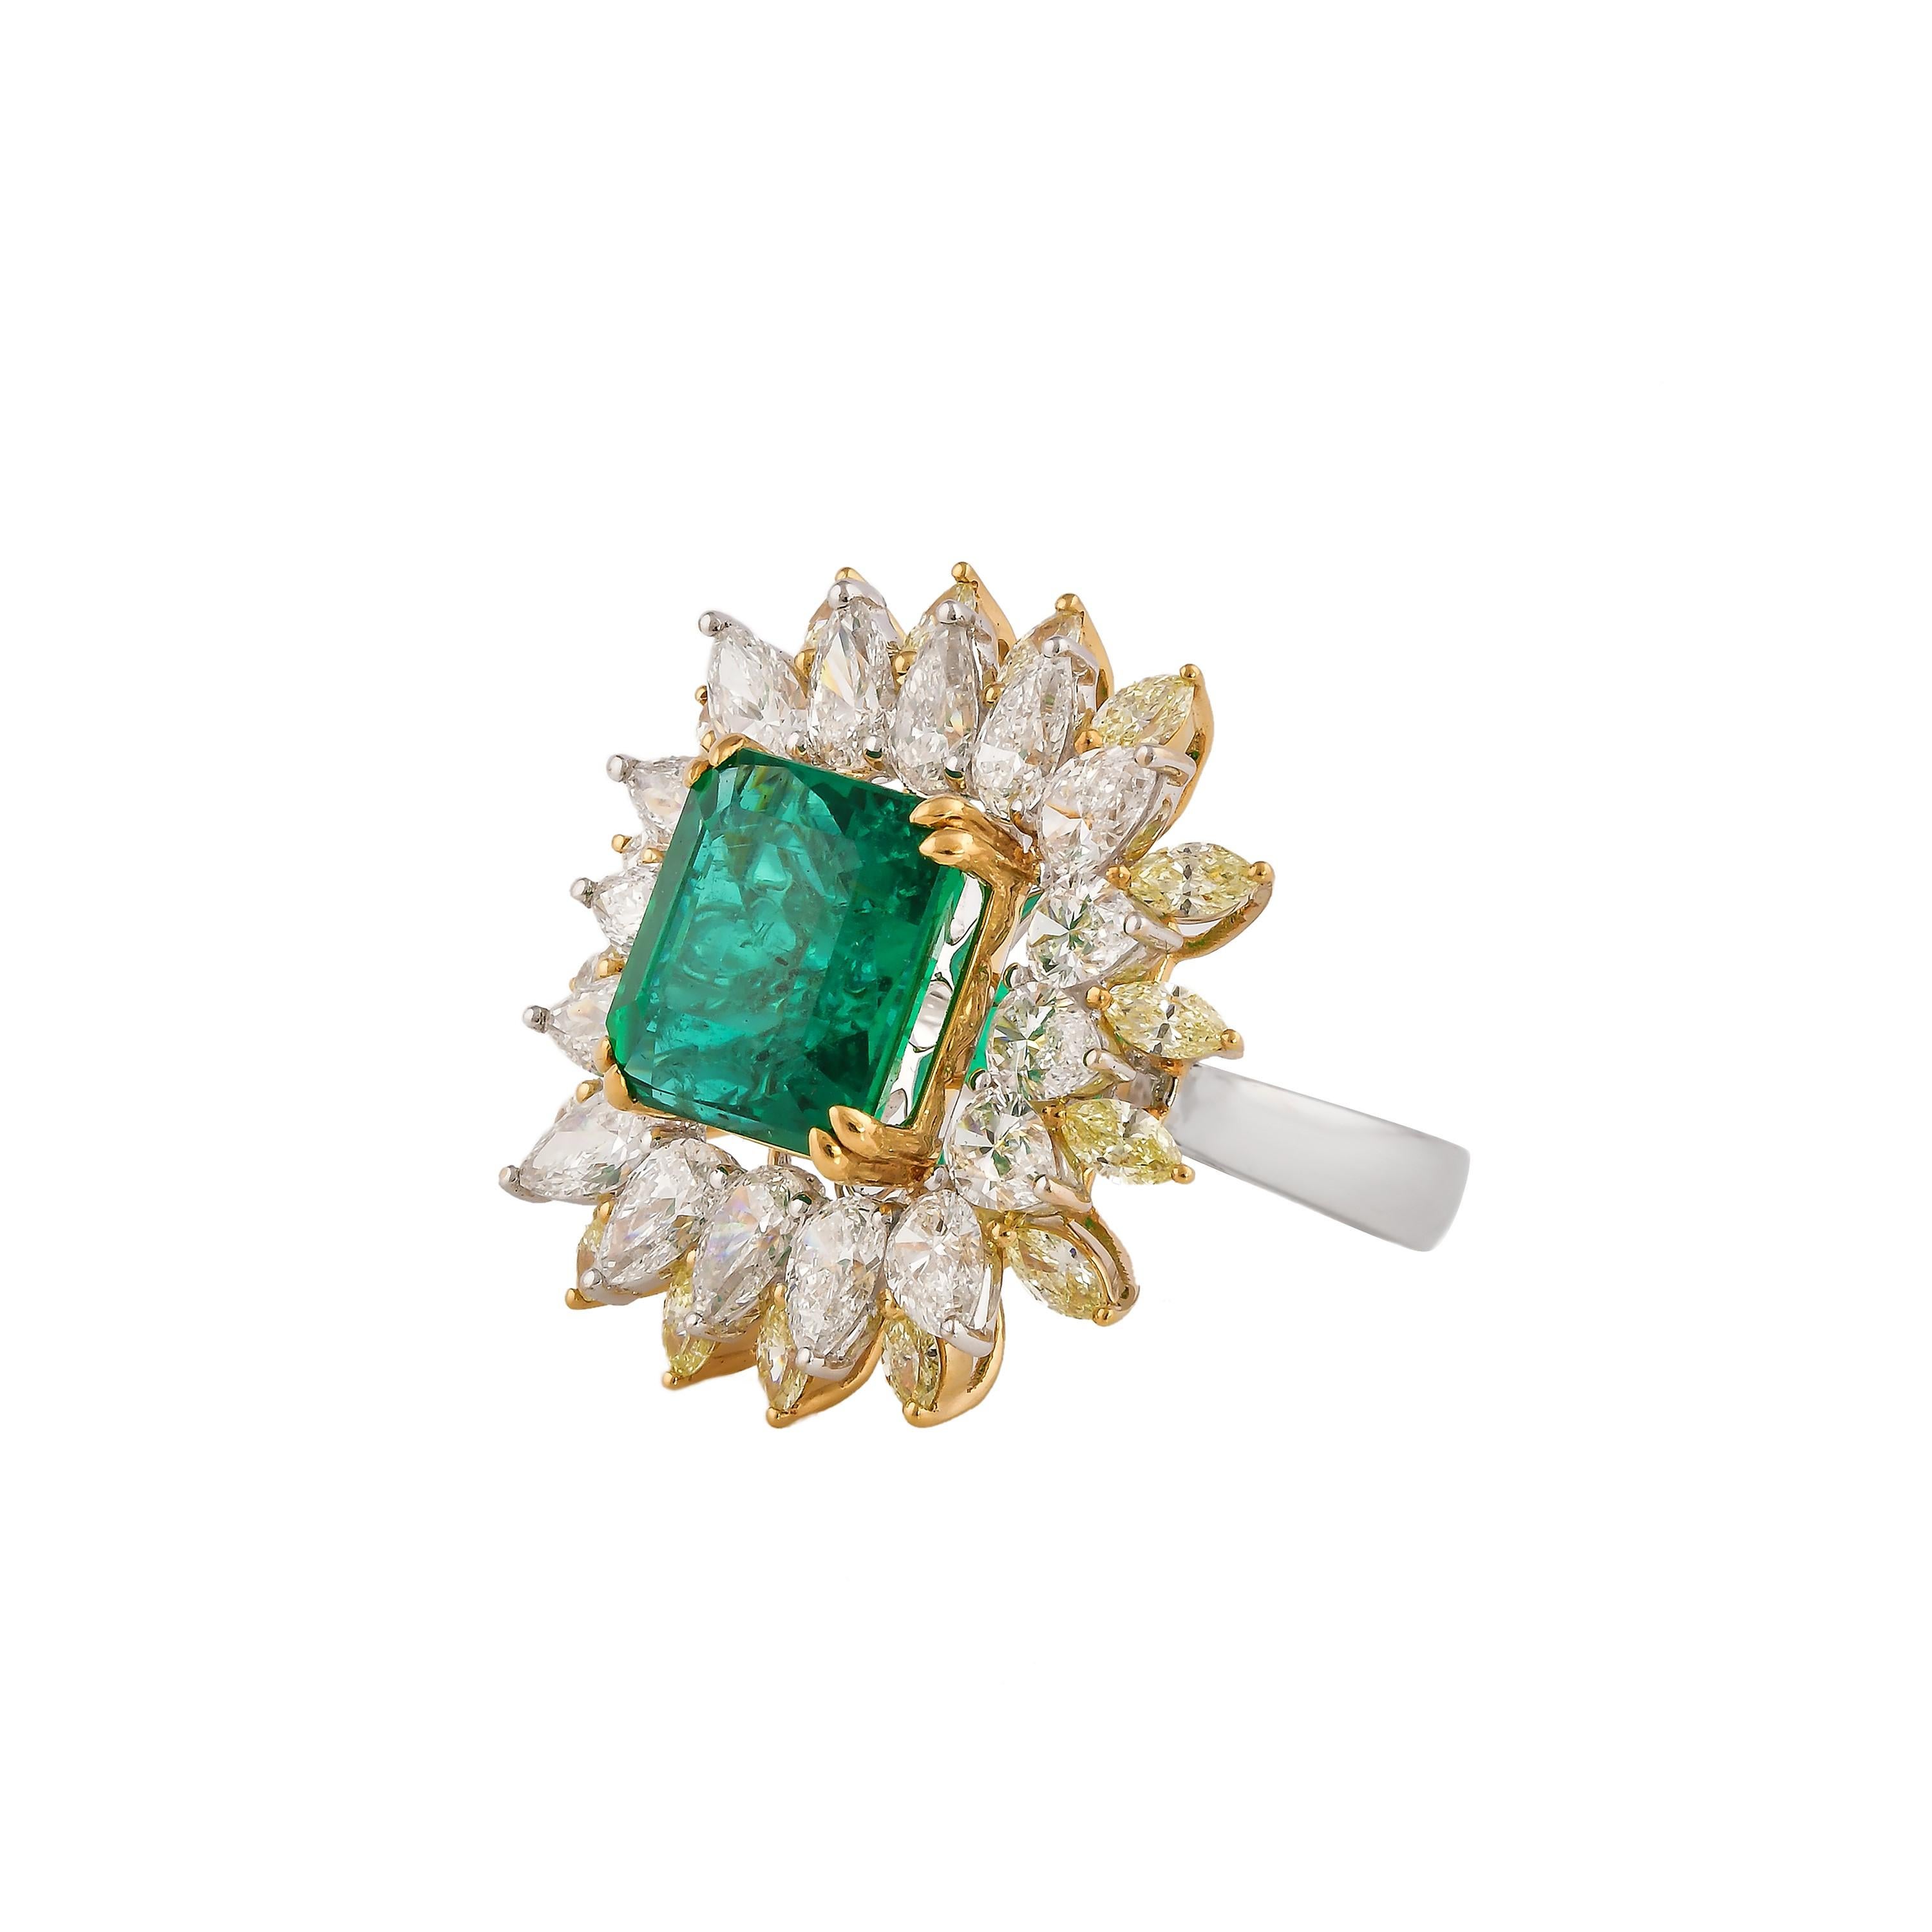 Contemporary GRS Certified 4.9 Carat Zambian Emerald and Diamond Ring in 18 Karat White Gold For Sale